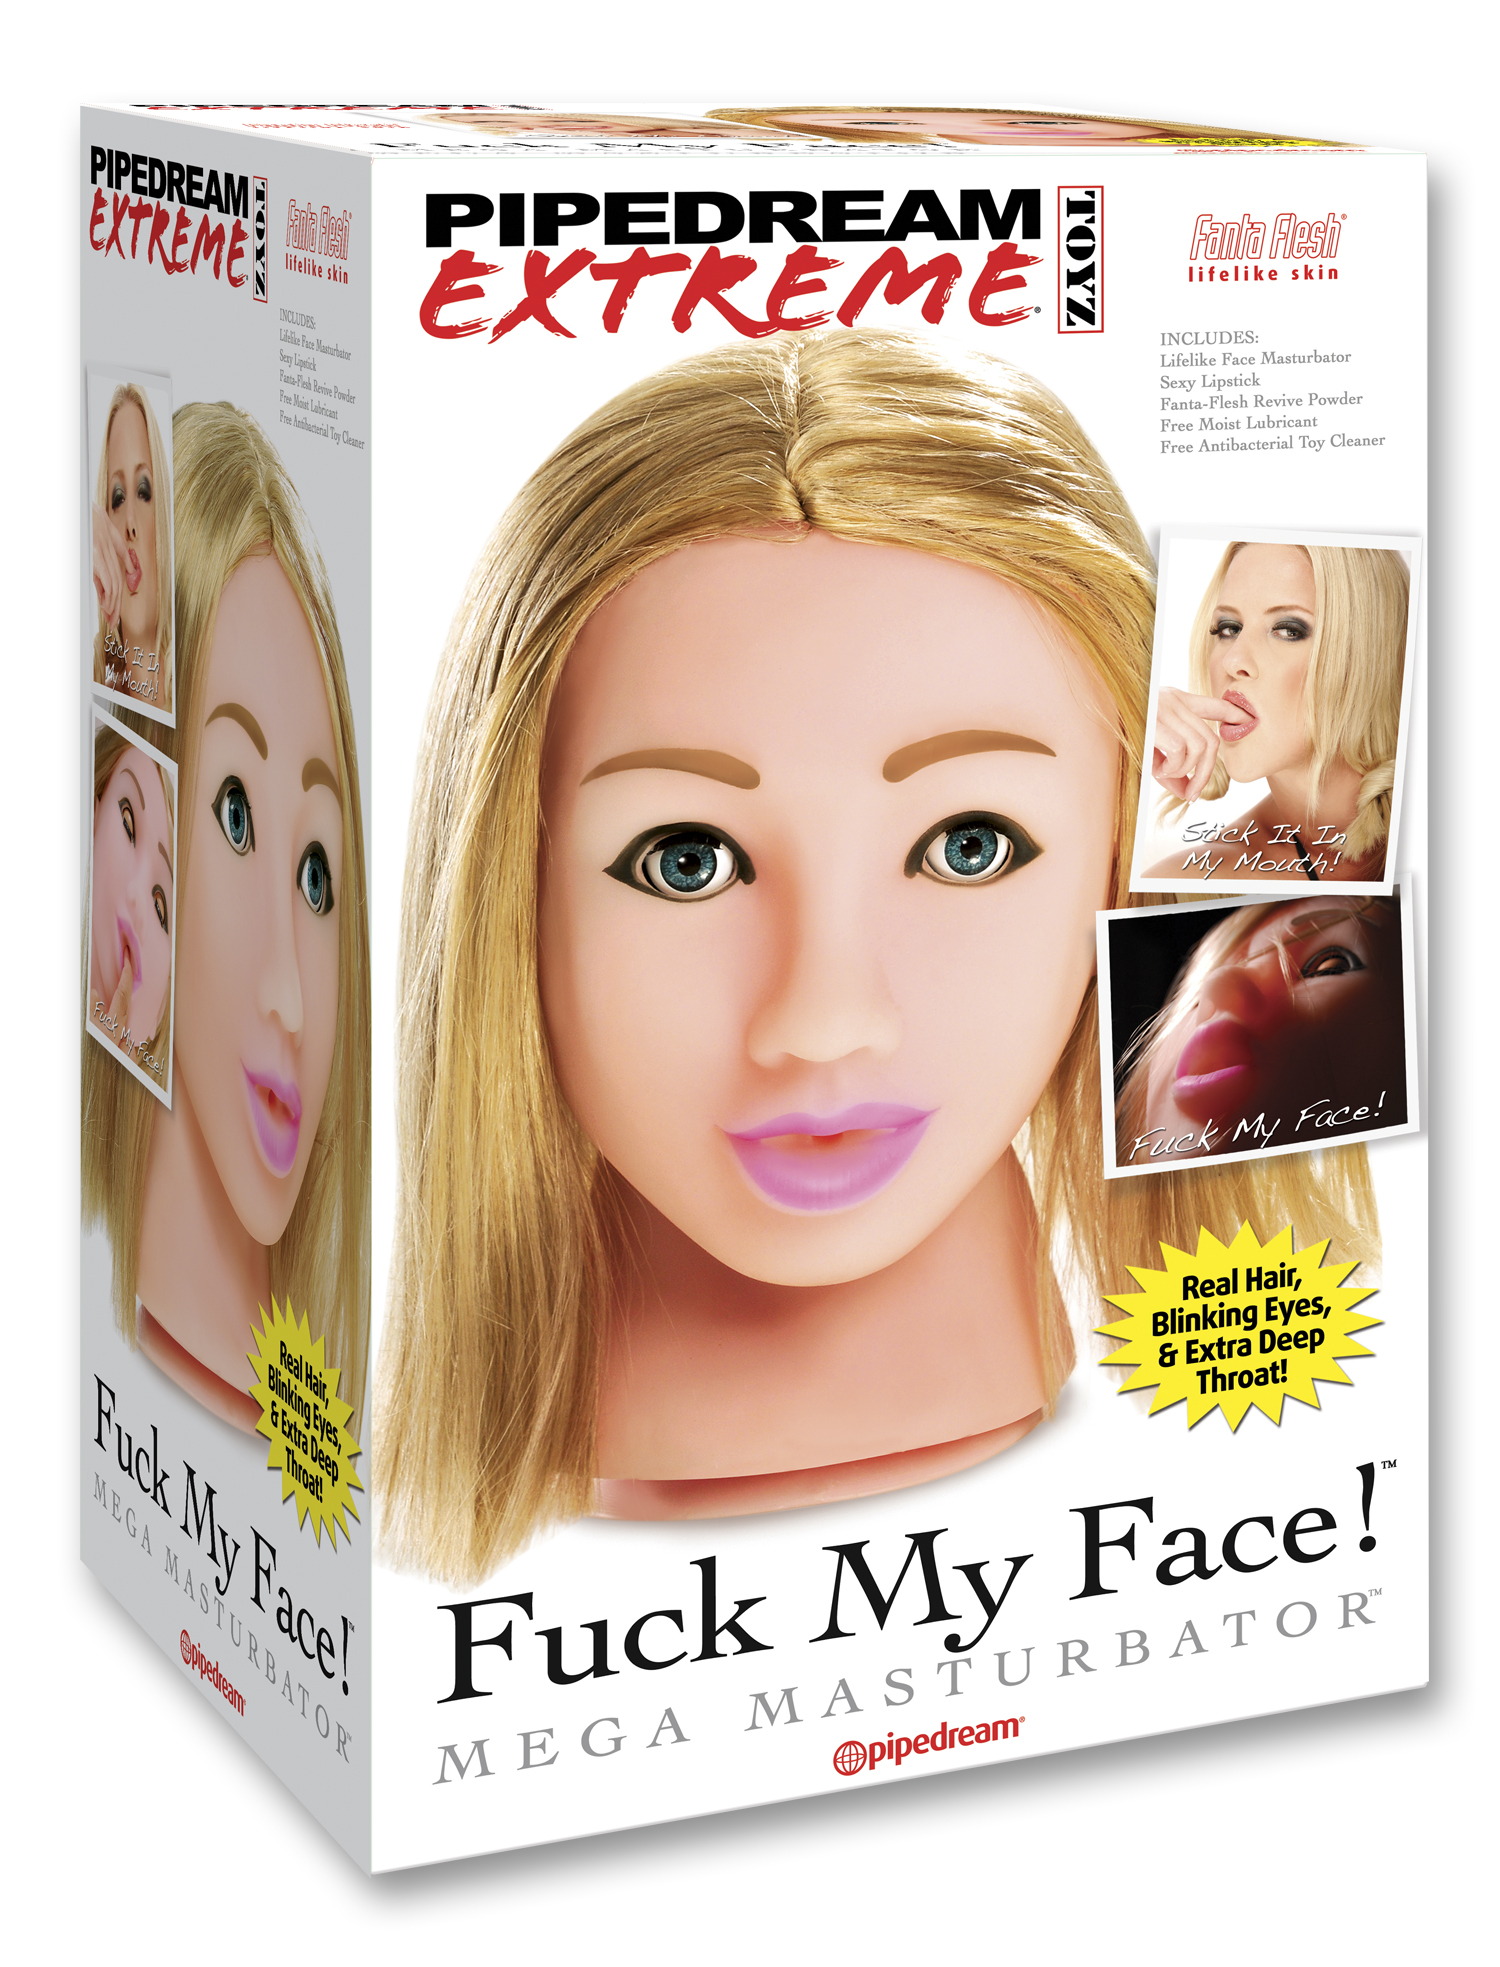 Pipedream Extreme Fuck My Face Blonde Adult Toy World